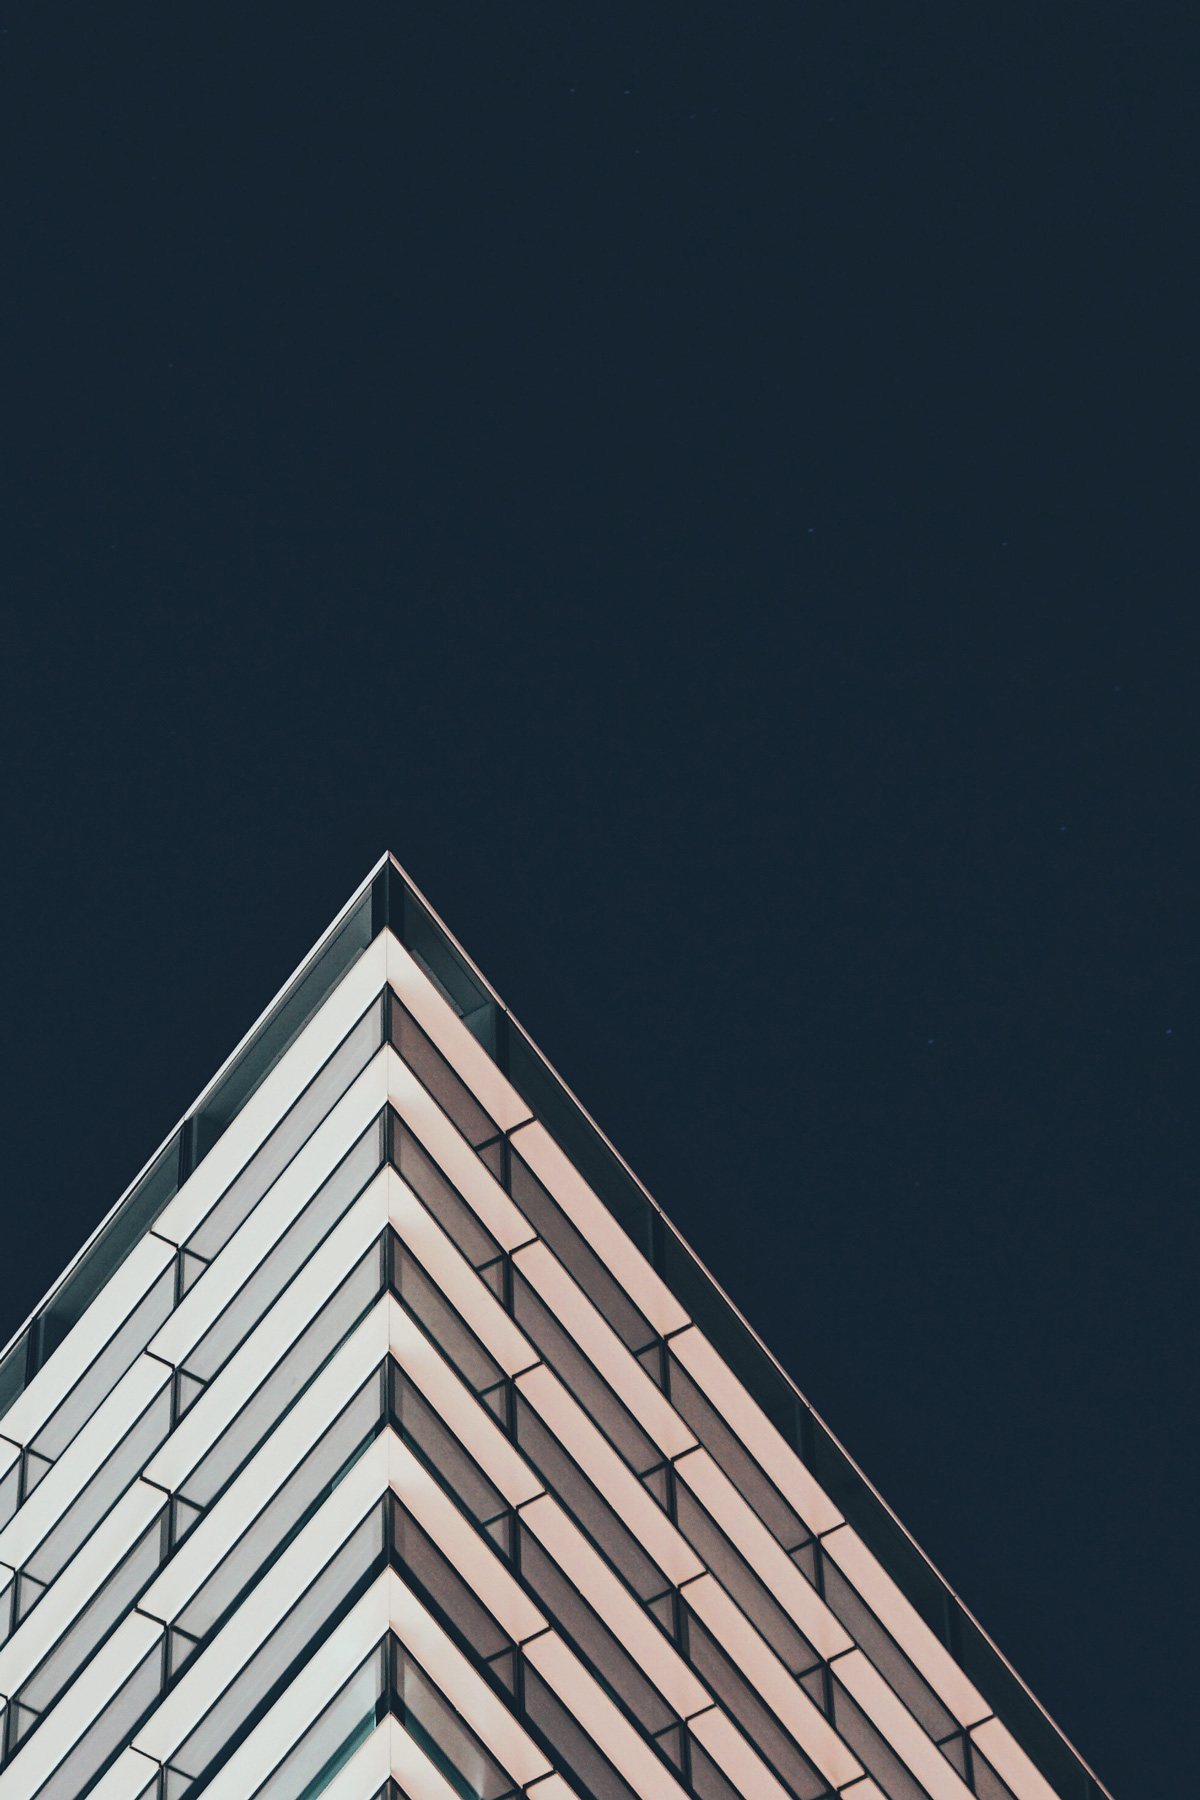 The corner of a tall building against a dark blue sky